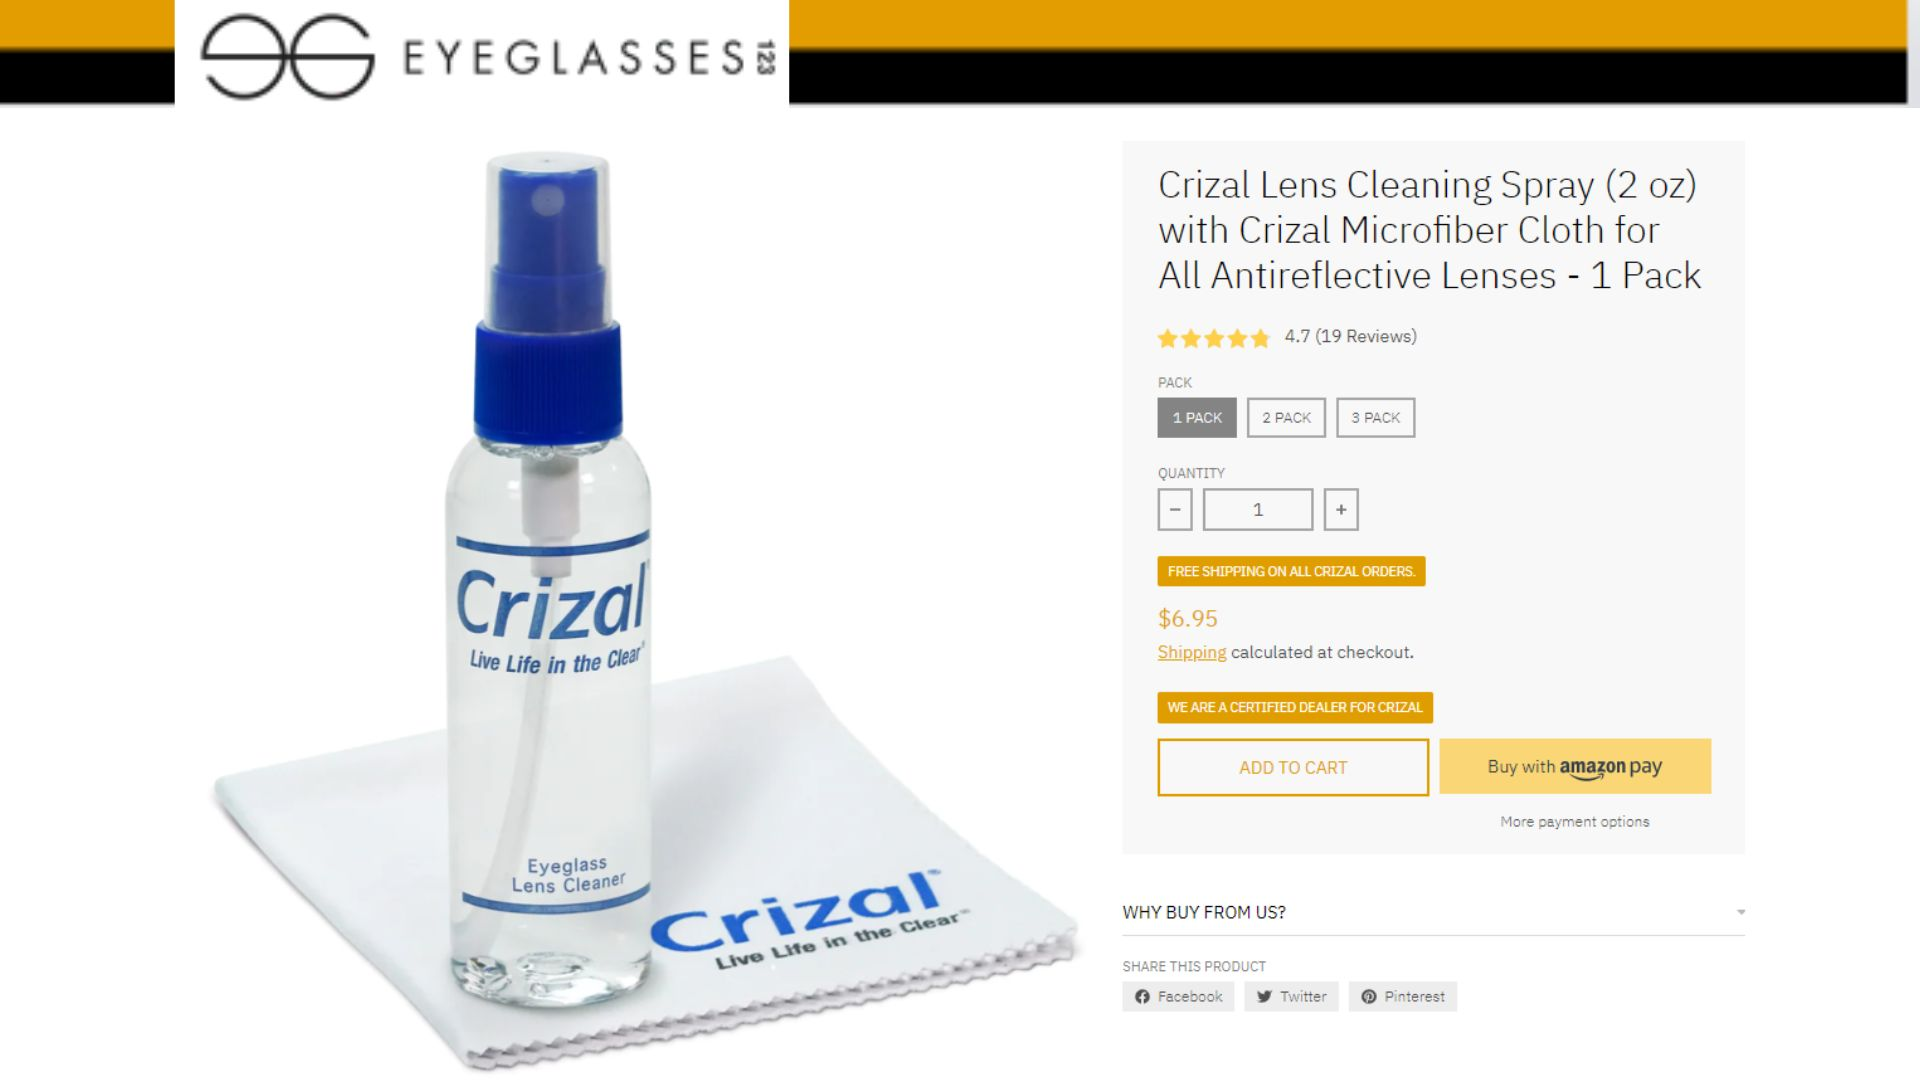 lens cleaner 2 oz with crizal microfiber cloth